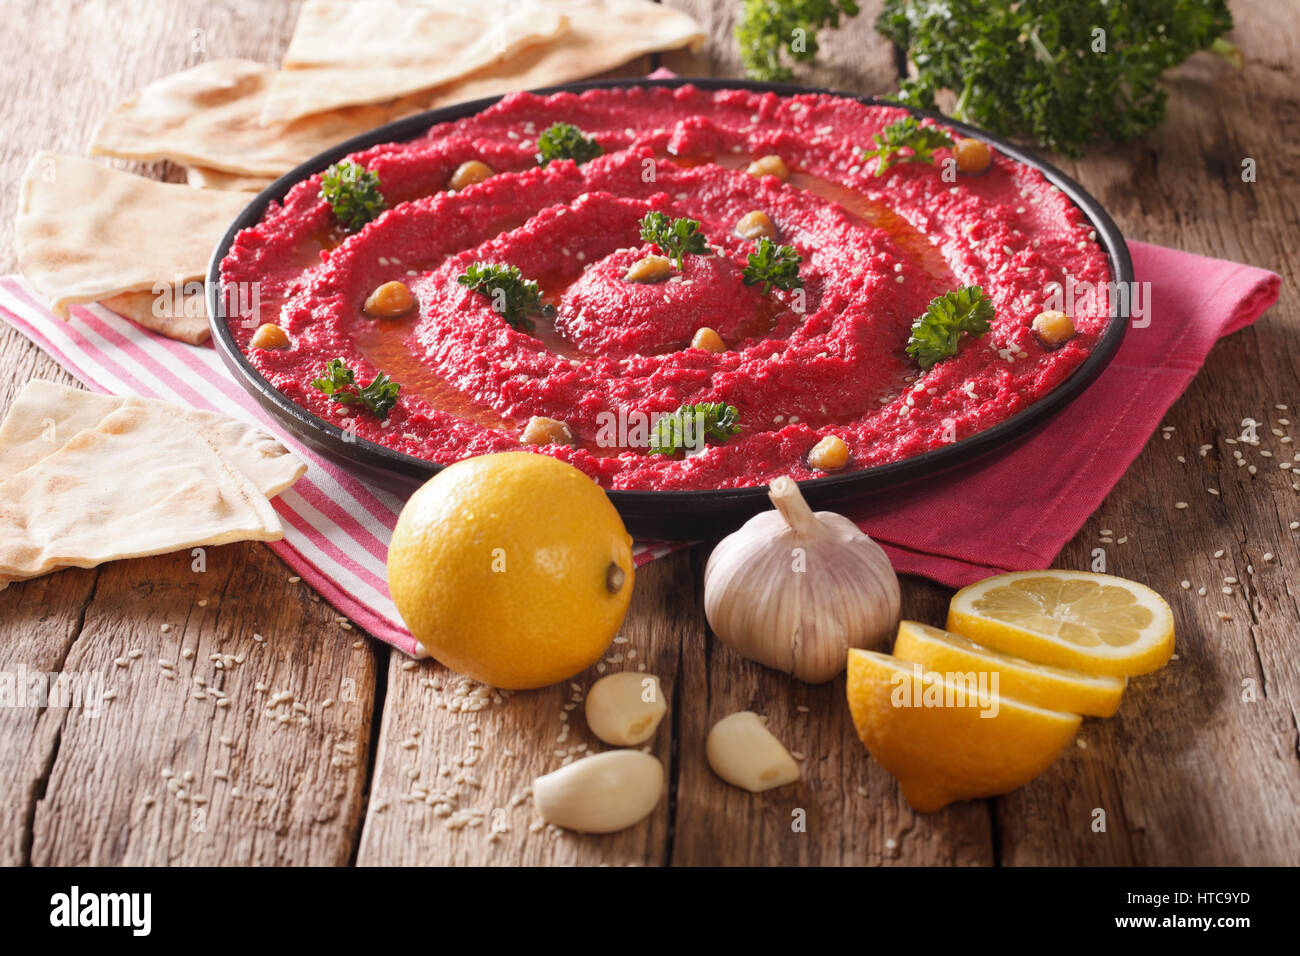 Hummus of chickpeas and beetroot and ingredients close-up on the table. Horizontal Stock Photo